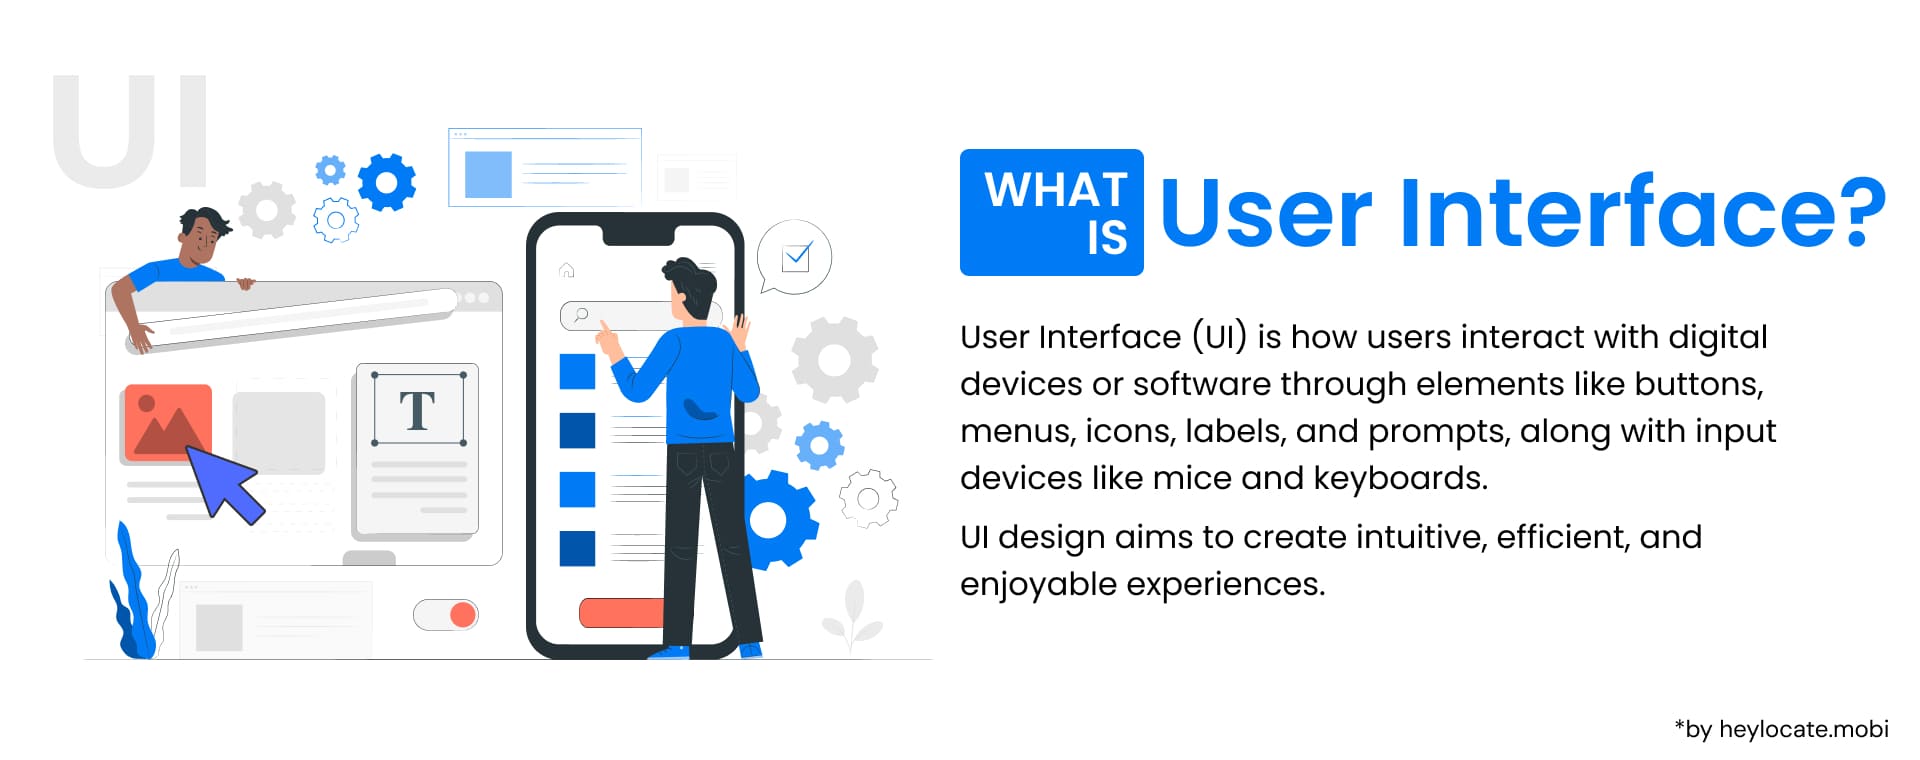 Diagram explaining User Interface (UI) with icons representing buttons, menus, and prompts, and figures interacting with a computer and mobile device